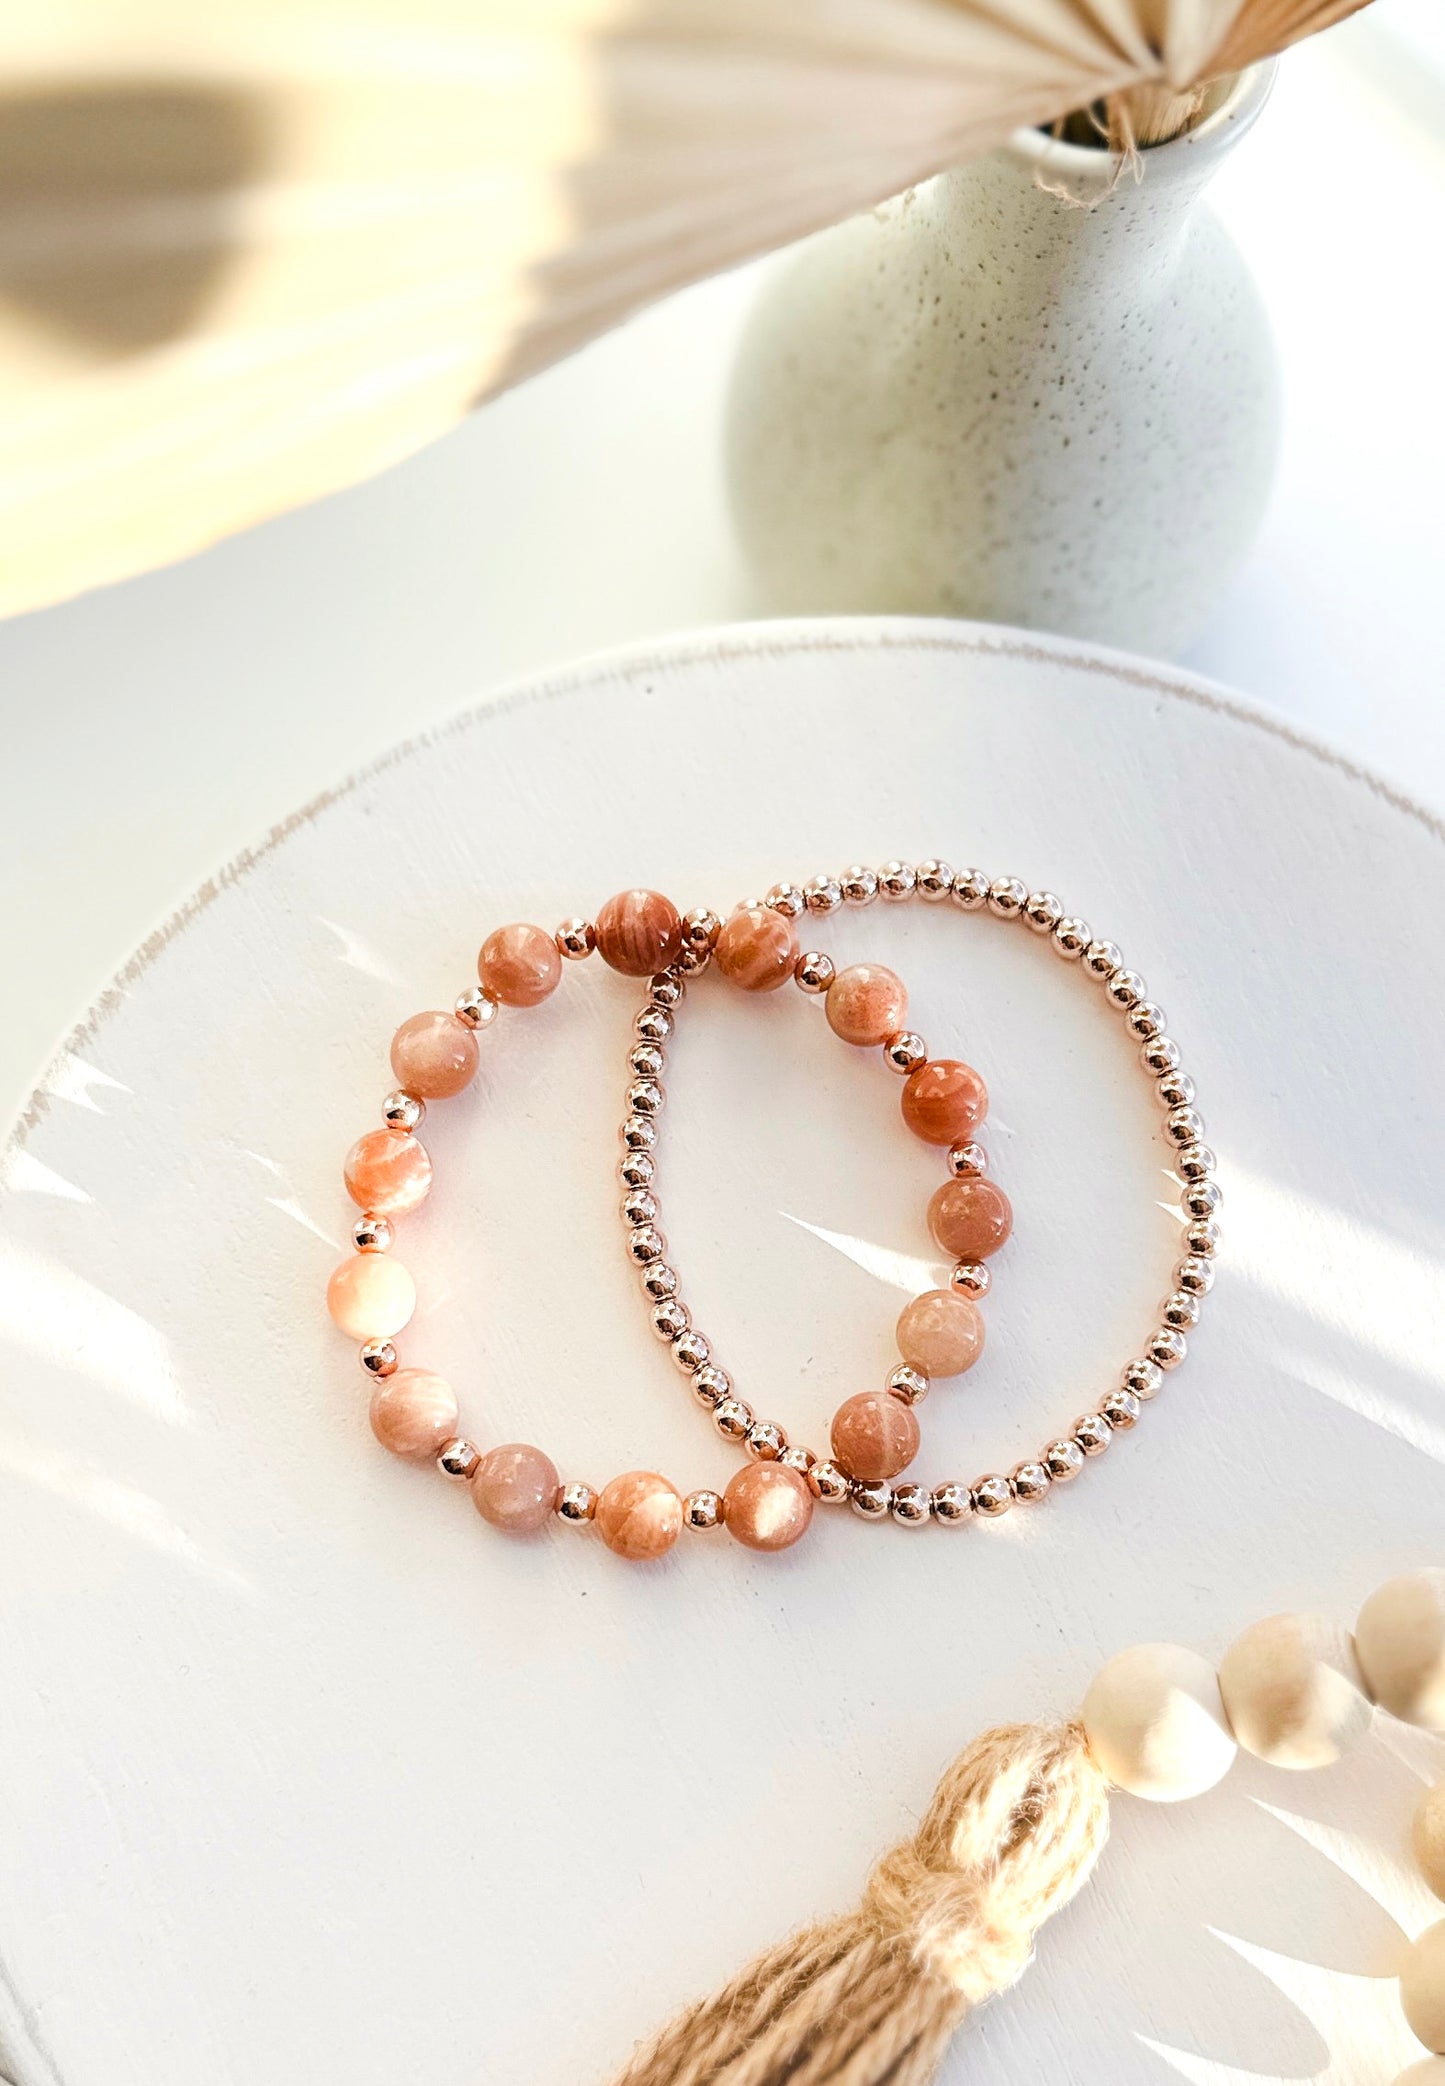 Introducing our exquisite gemstone bracelet set, crafted with the powerful energies of Sunstone and the elegance of Rose Gold Hematite.

Sunstone, known for its radiant warmth, promotes joy, vitality, and personal power. Complementing this, Rose Gold Hematite is believed to bring balance, grounding, and a sense of tranquility.

